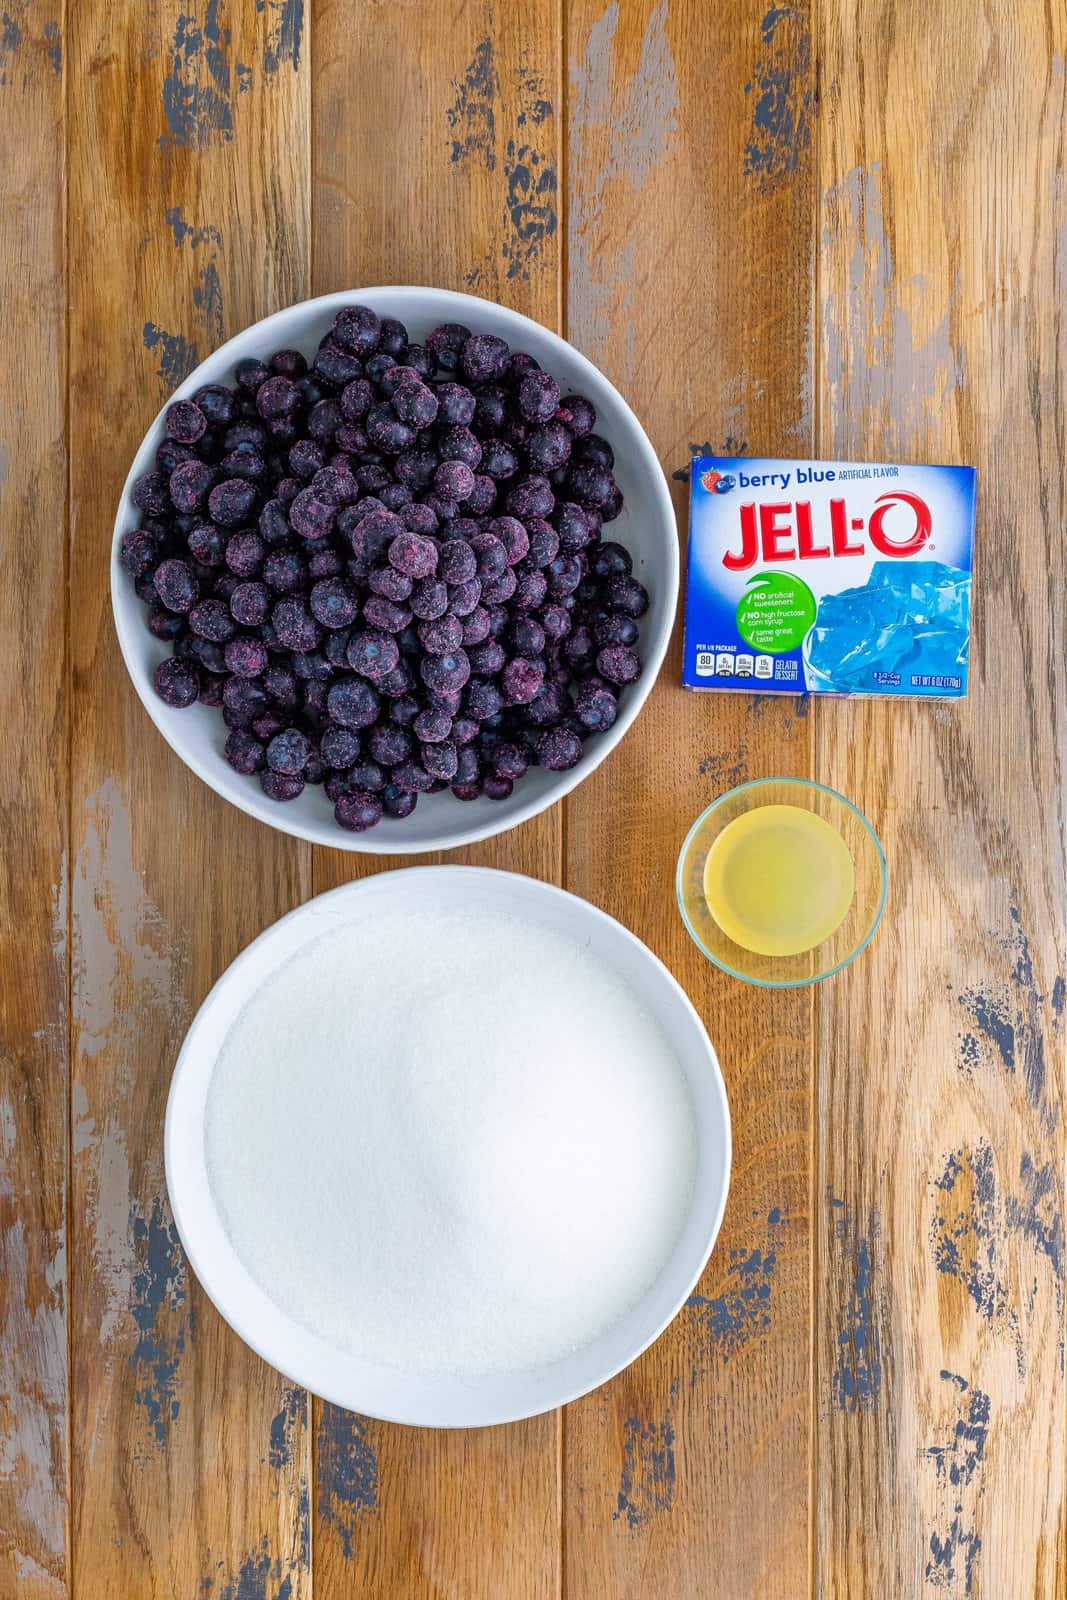 Blueberry Jello, sugar, and blueberries.